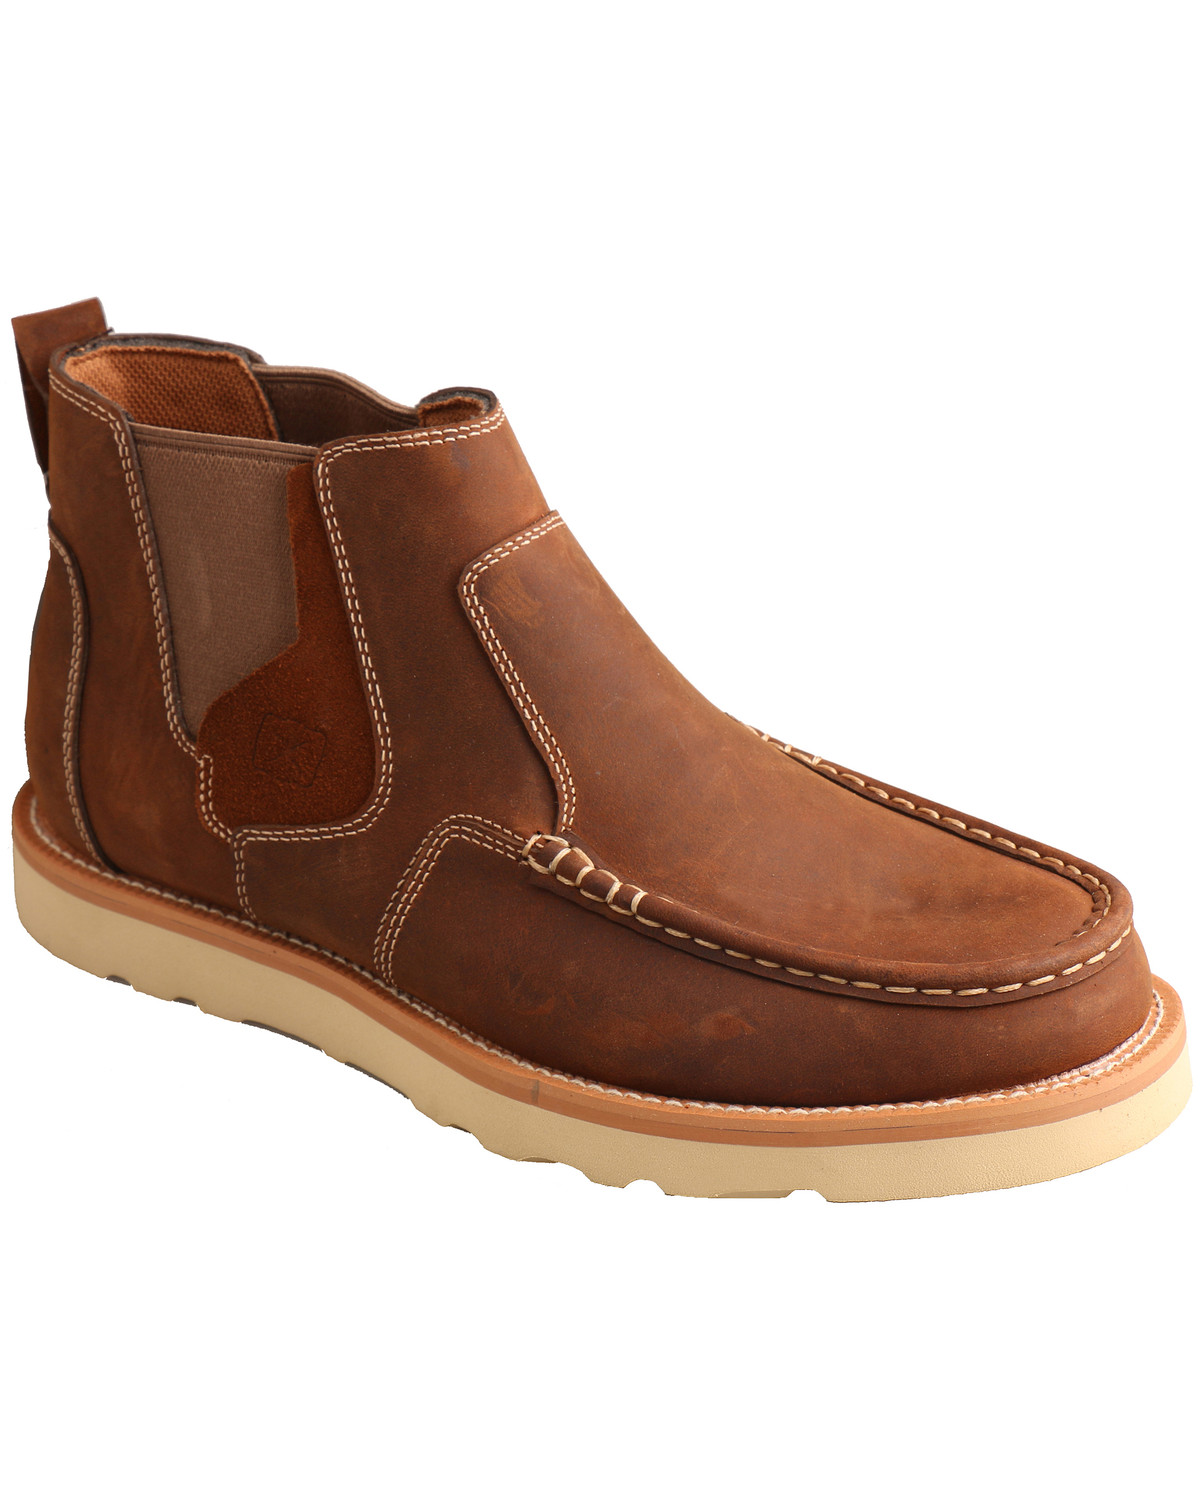 Brown Casual Pull-On Shoes - Moc Toe 